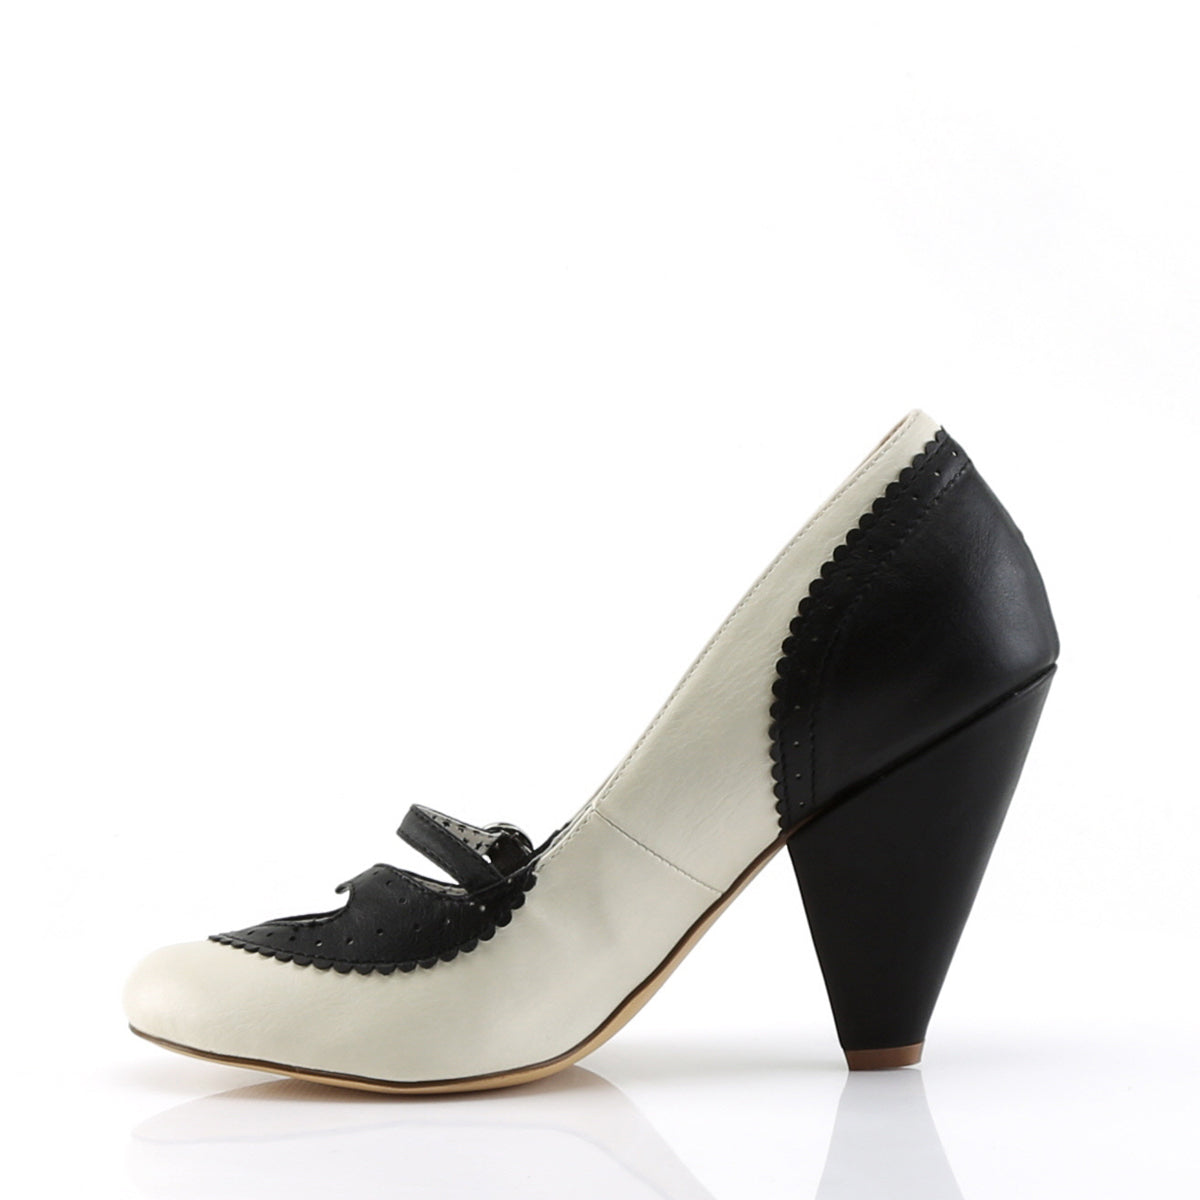 3 3/4" Cone Heel Maryjane Pump Black-Cream Faux Leather Pleaser Pin Up Couture POPPY/18